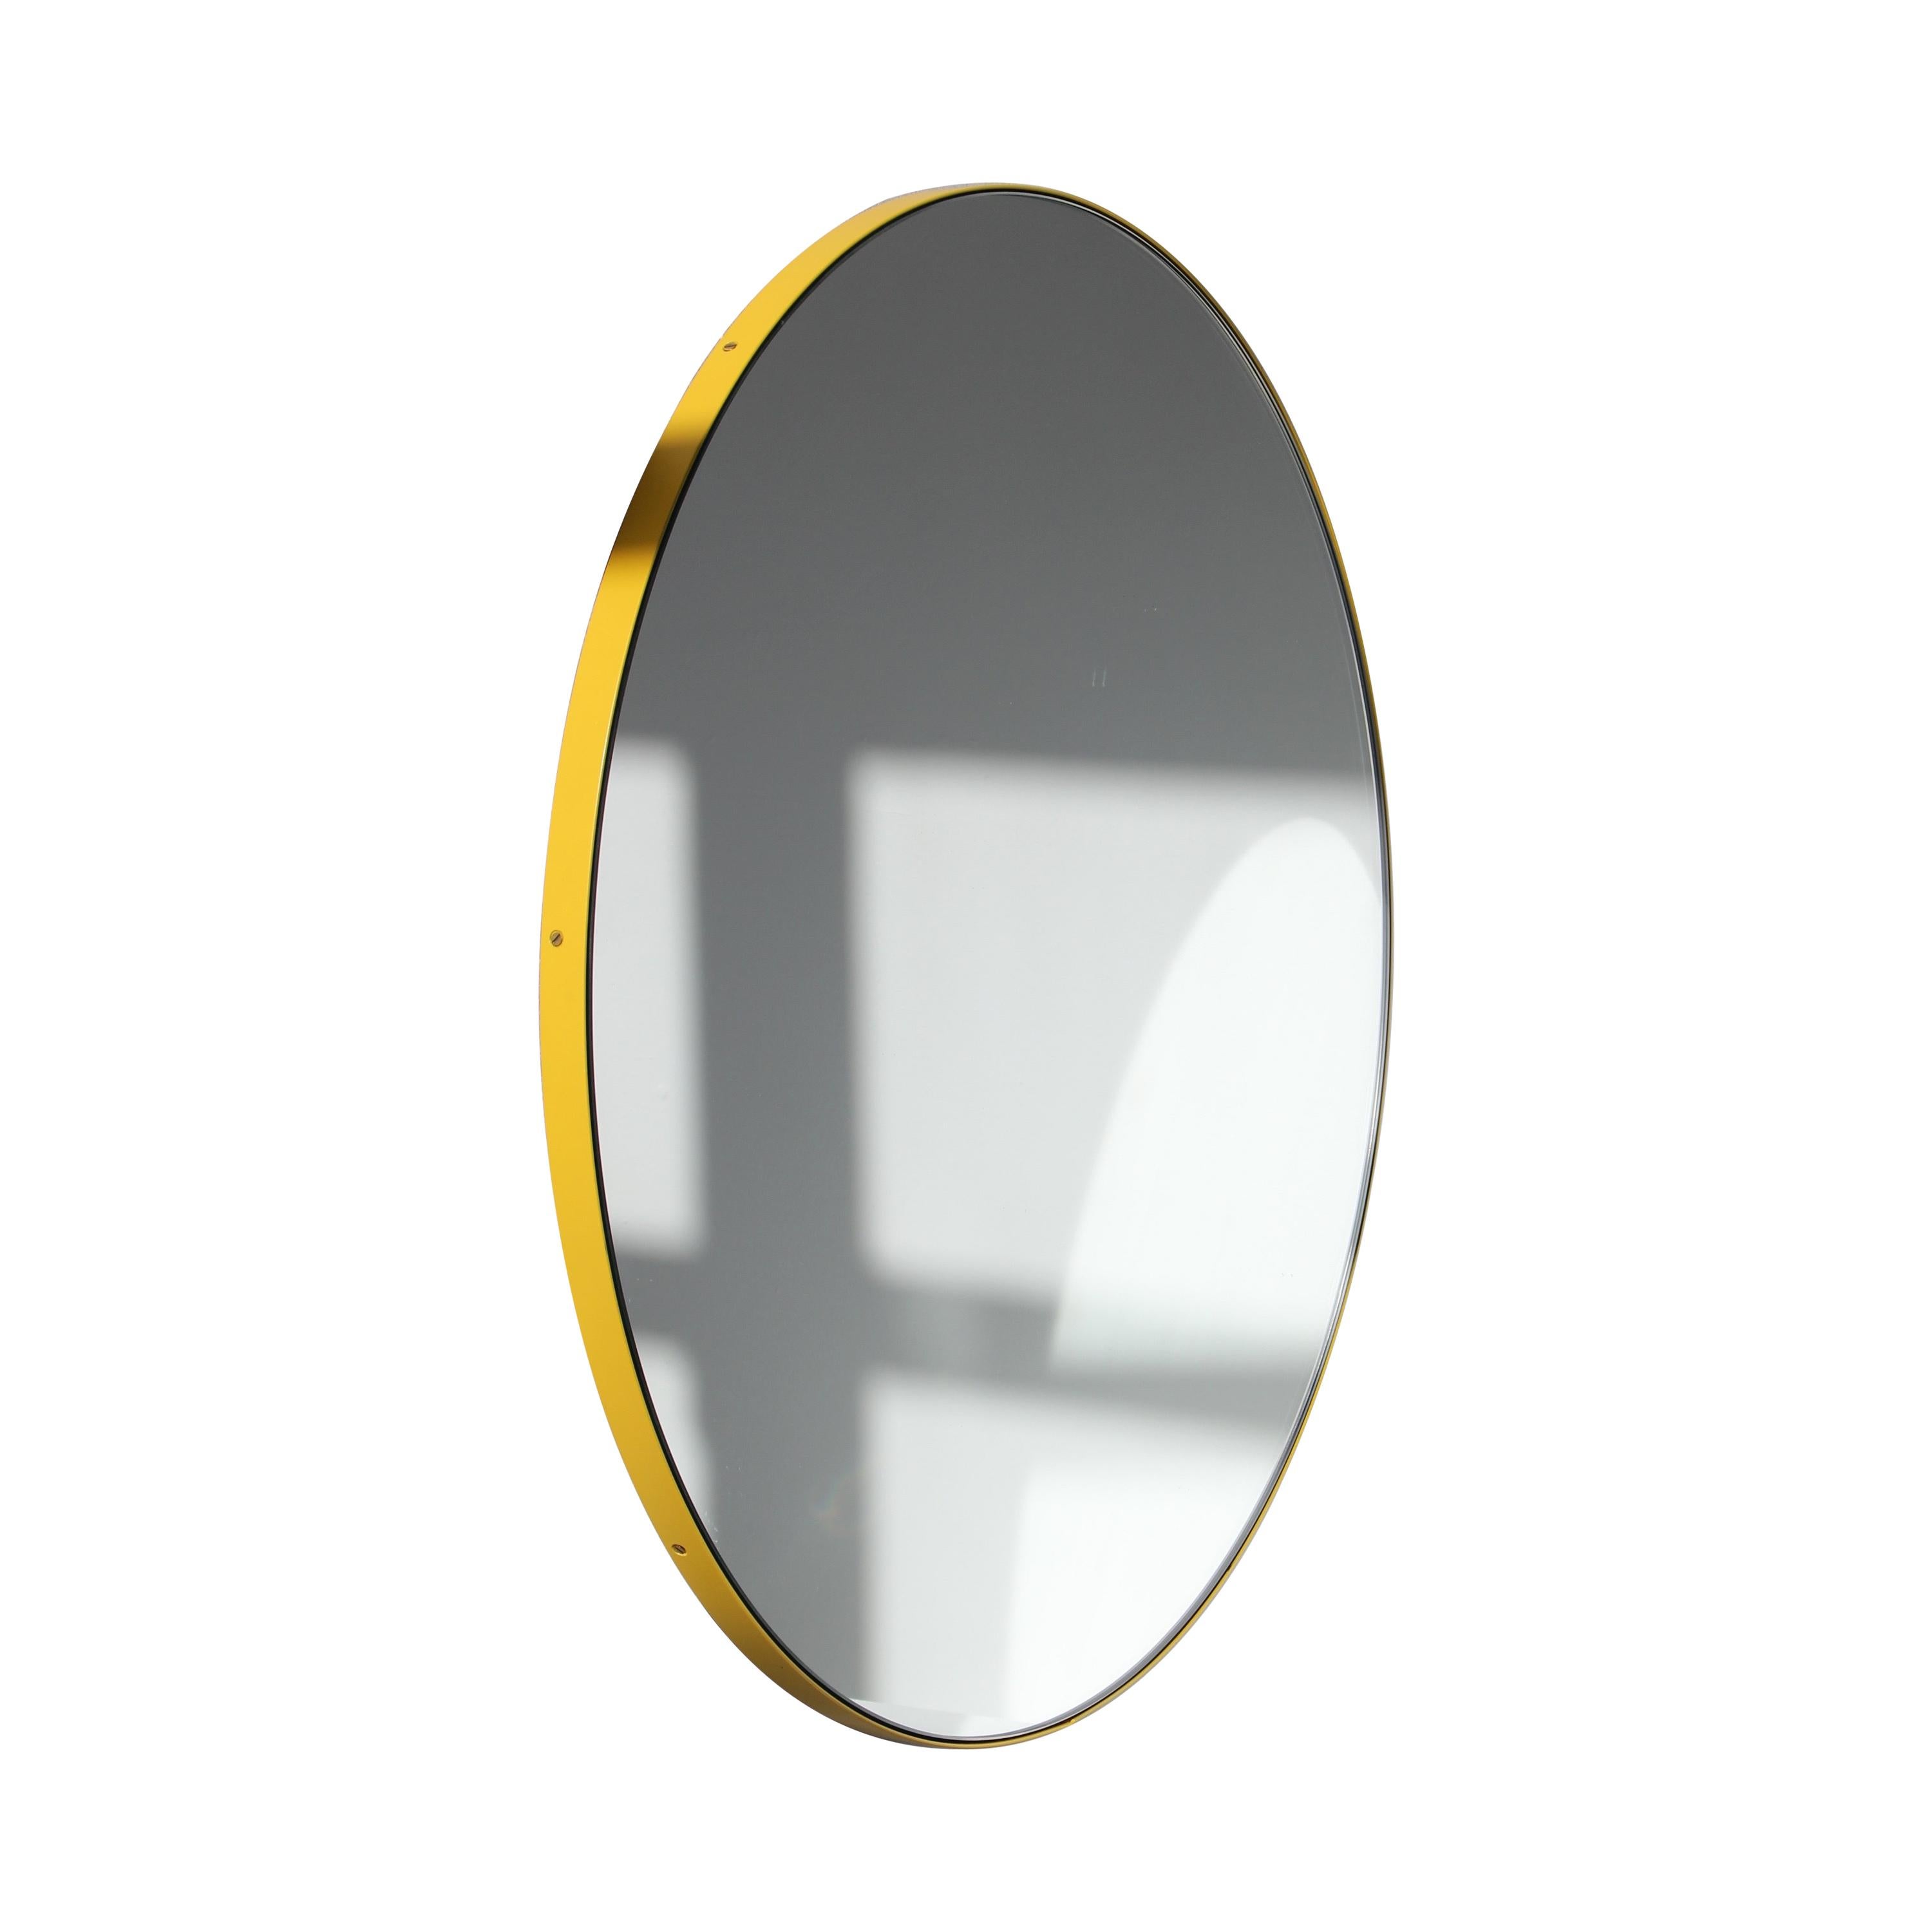 Orbis Round Modern Handcrafted Mirror with a Yellow Frame, XL